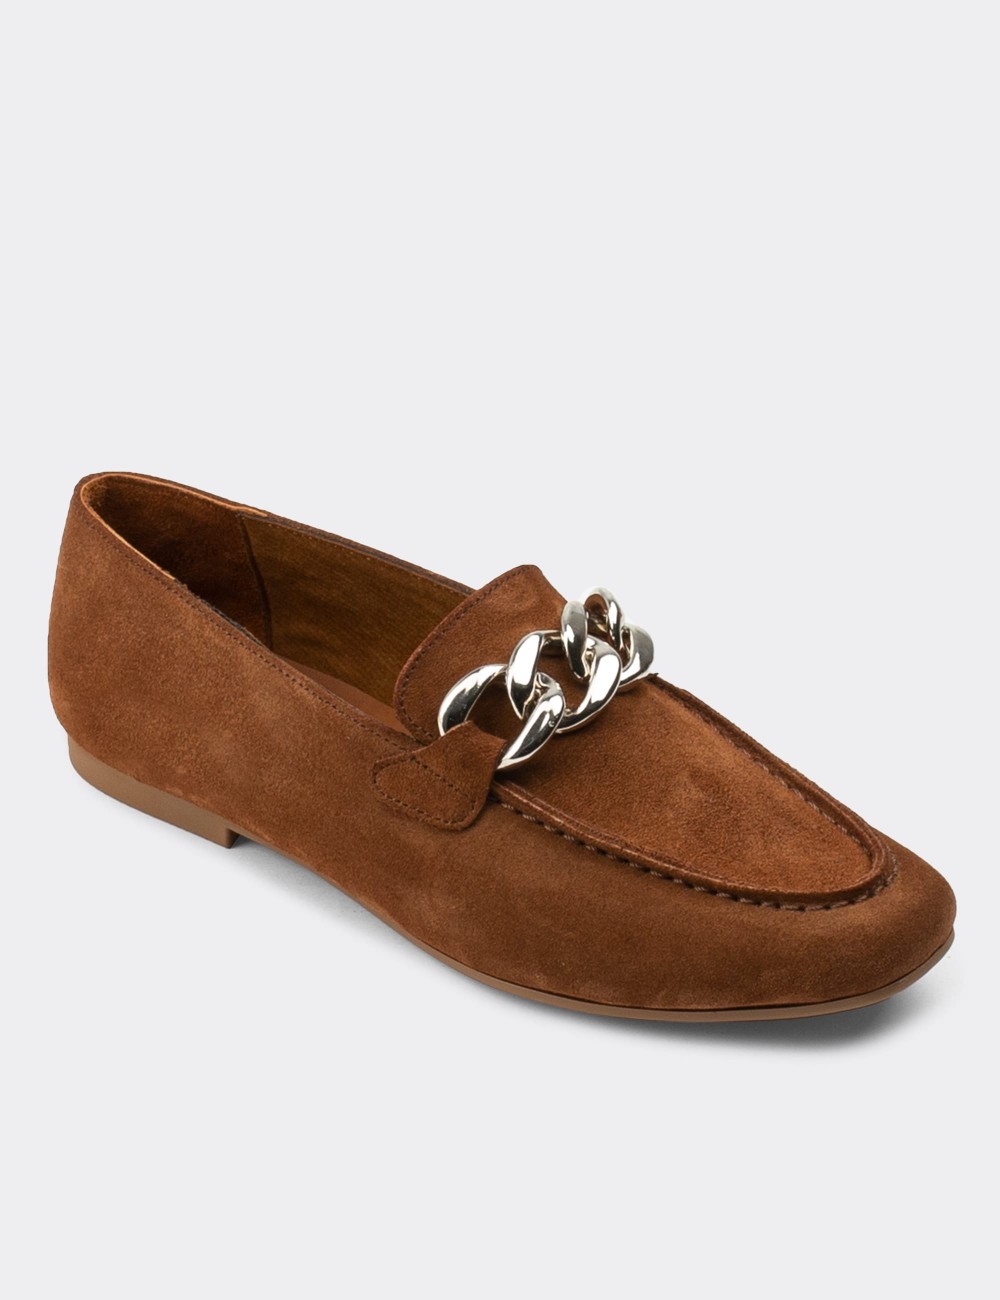 Tan Suede Leather Loafers - 01915ZTBAC01